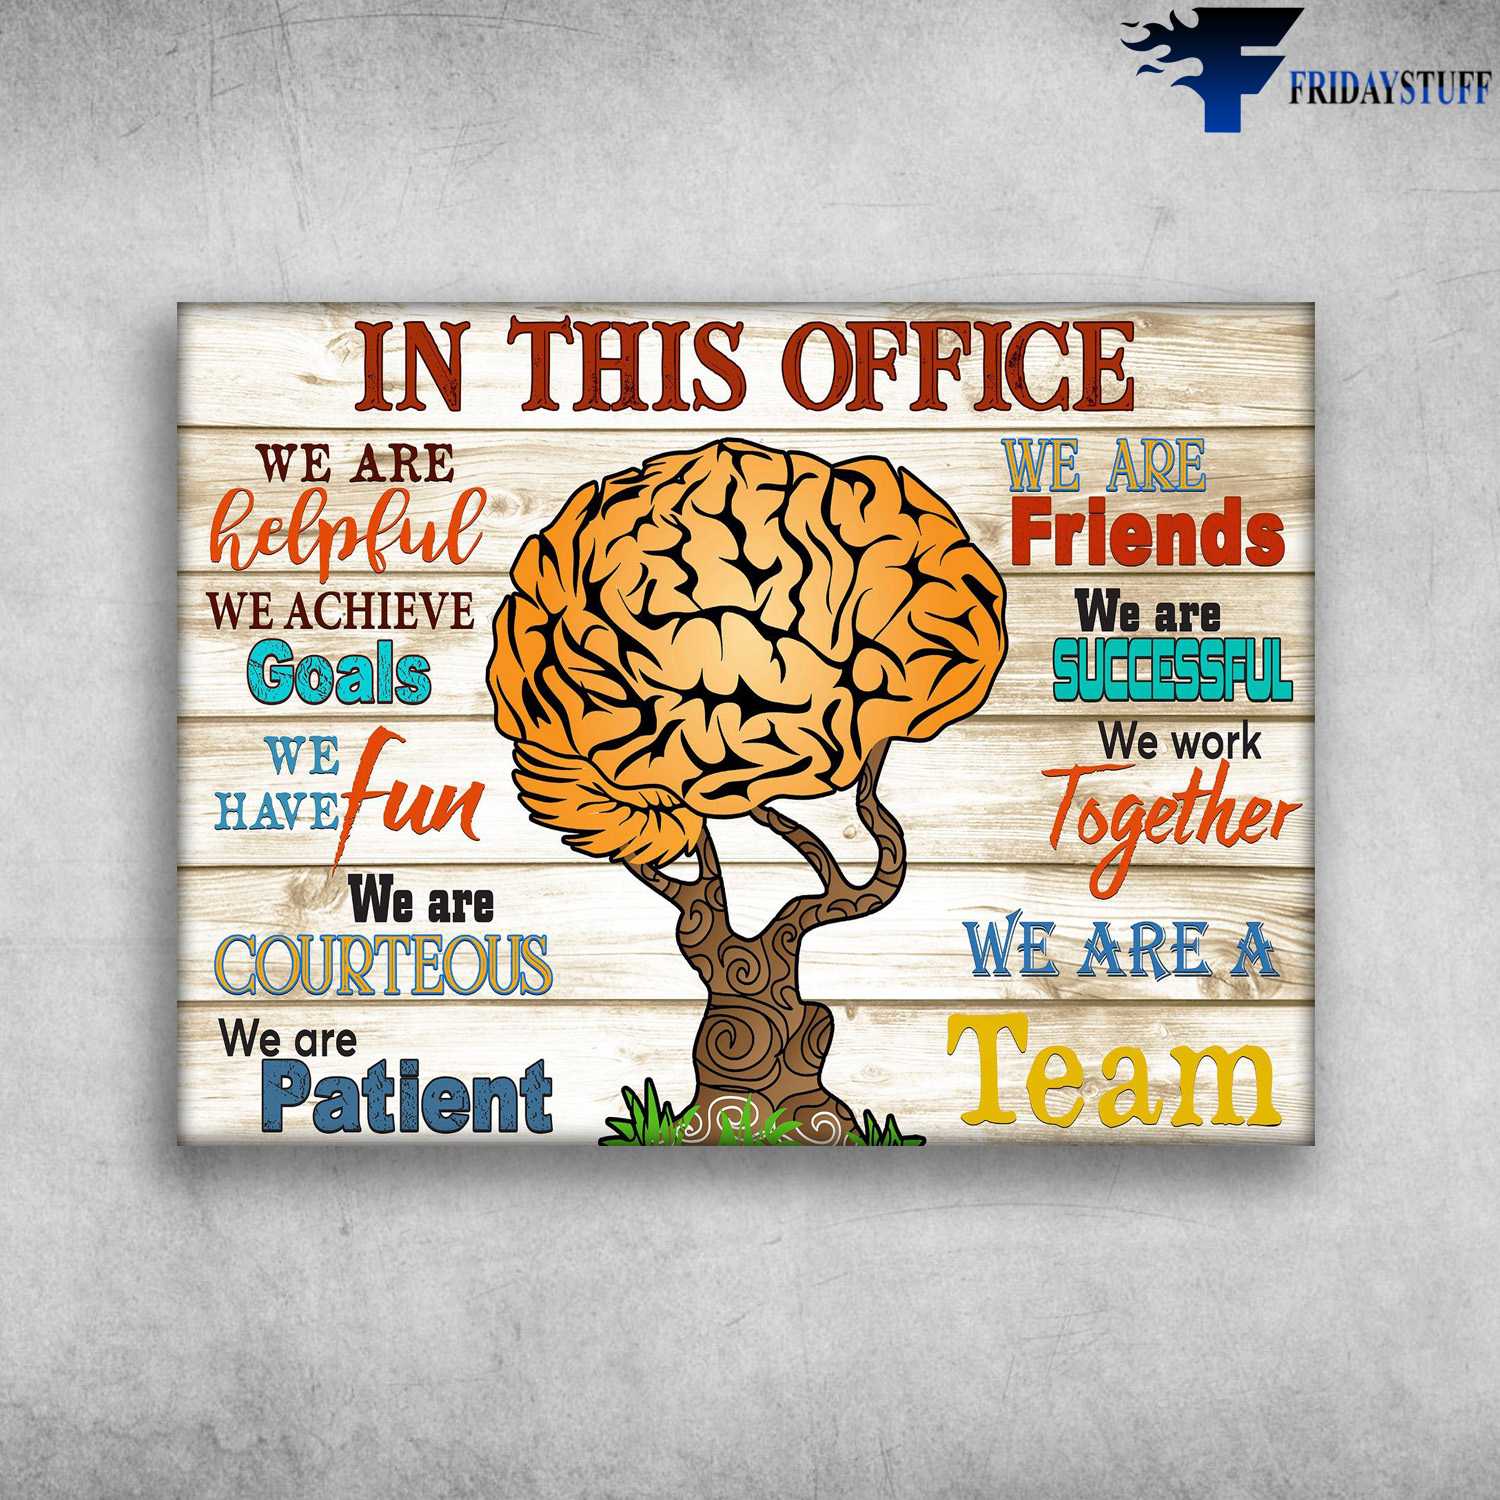 Office Poster - In This Office, We Are Helpful, We Achive Goals, We Have Fun, We Are Courteous, We Are Patient, We Are Friend, We Work Together, We Are Team, Brain Tree